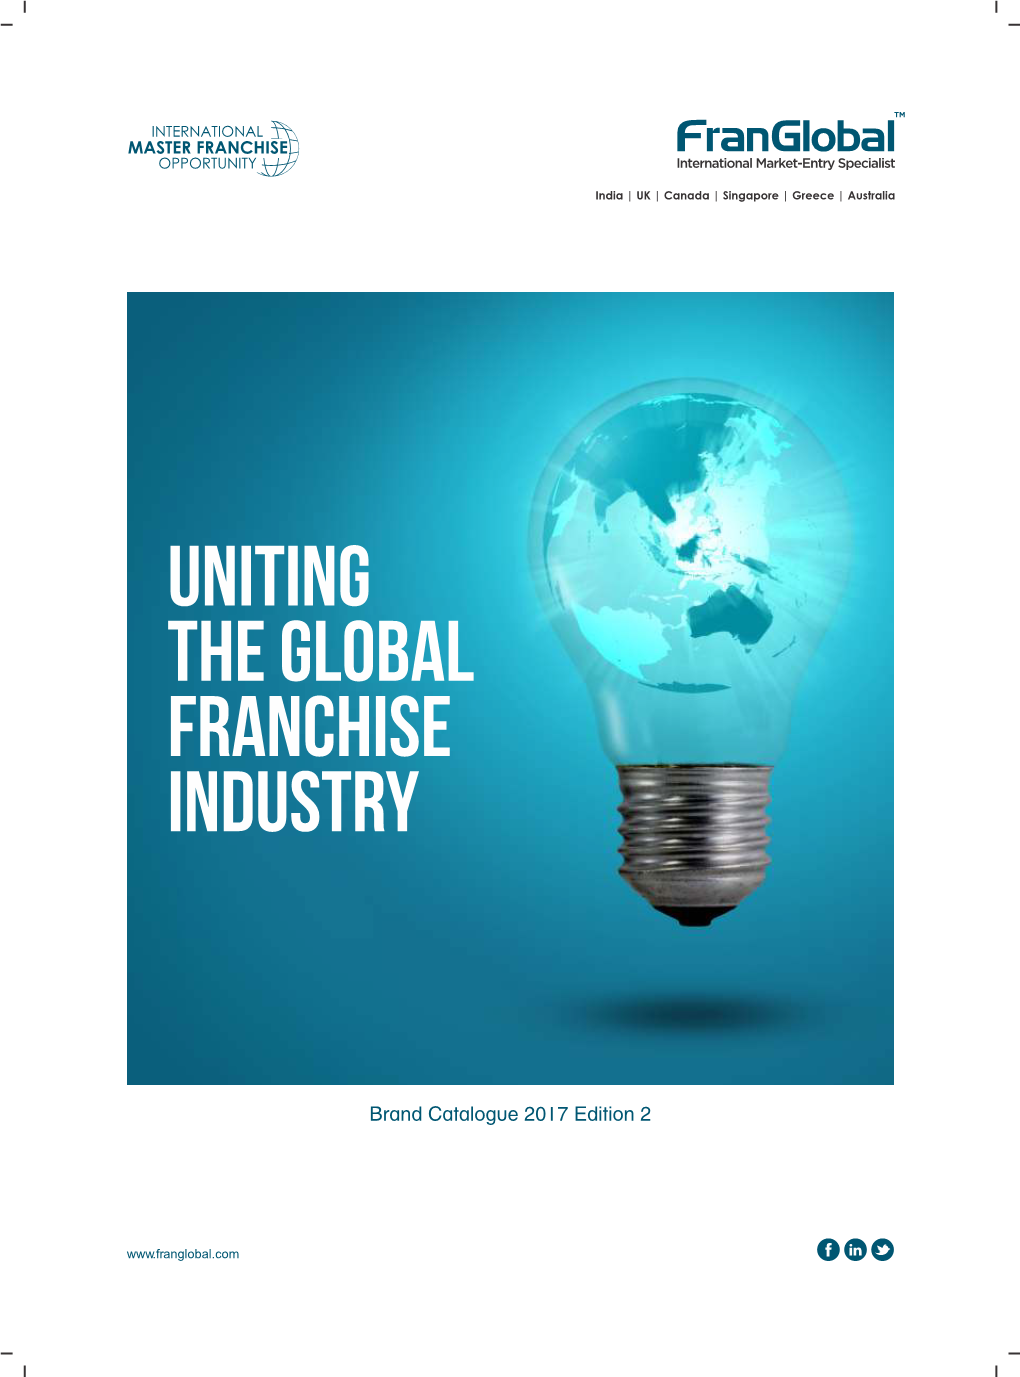 Uniting the Global Franchise Industry